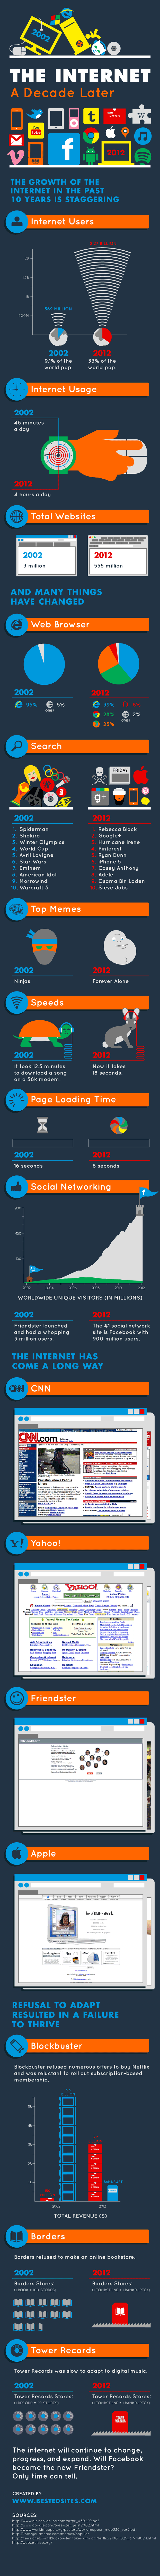 Internet a Decade Later Infographic